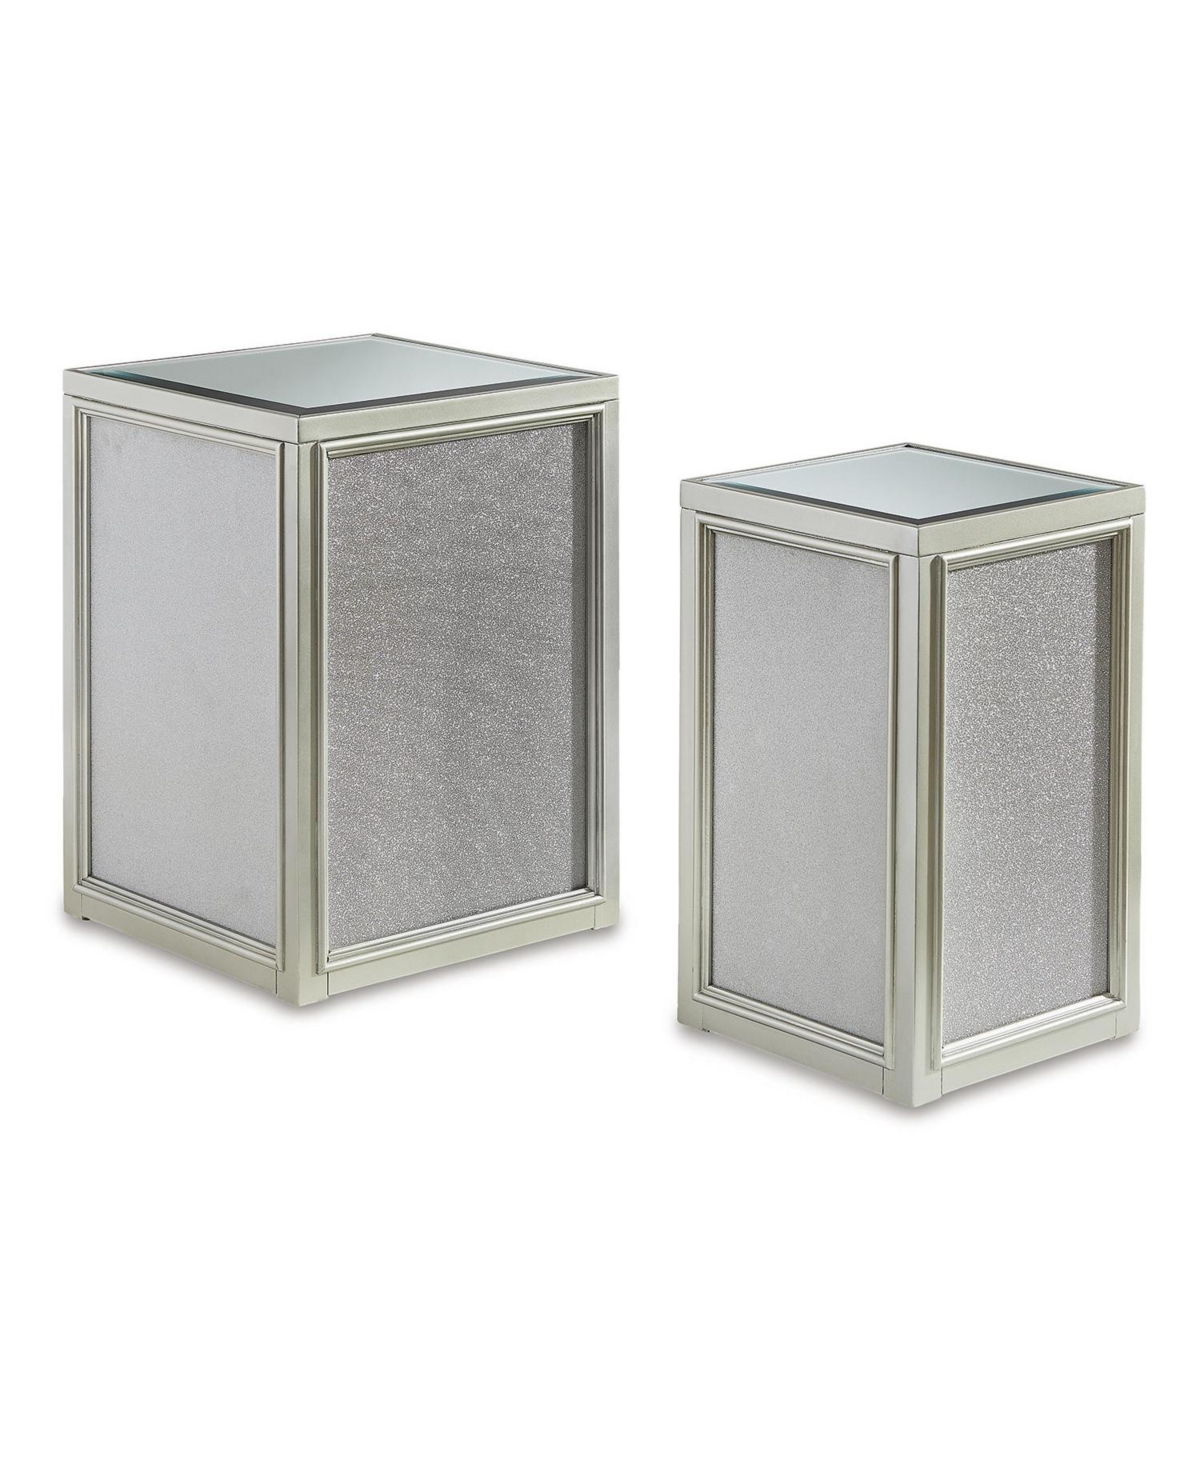 Signature Design By Ashley Traleena Nesting End Tables, Set Of 2 In Silver Finish